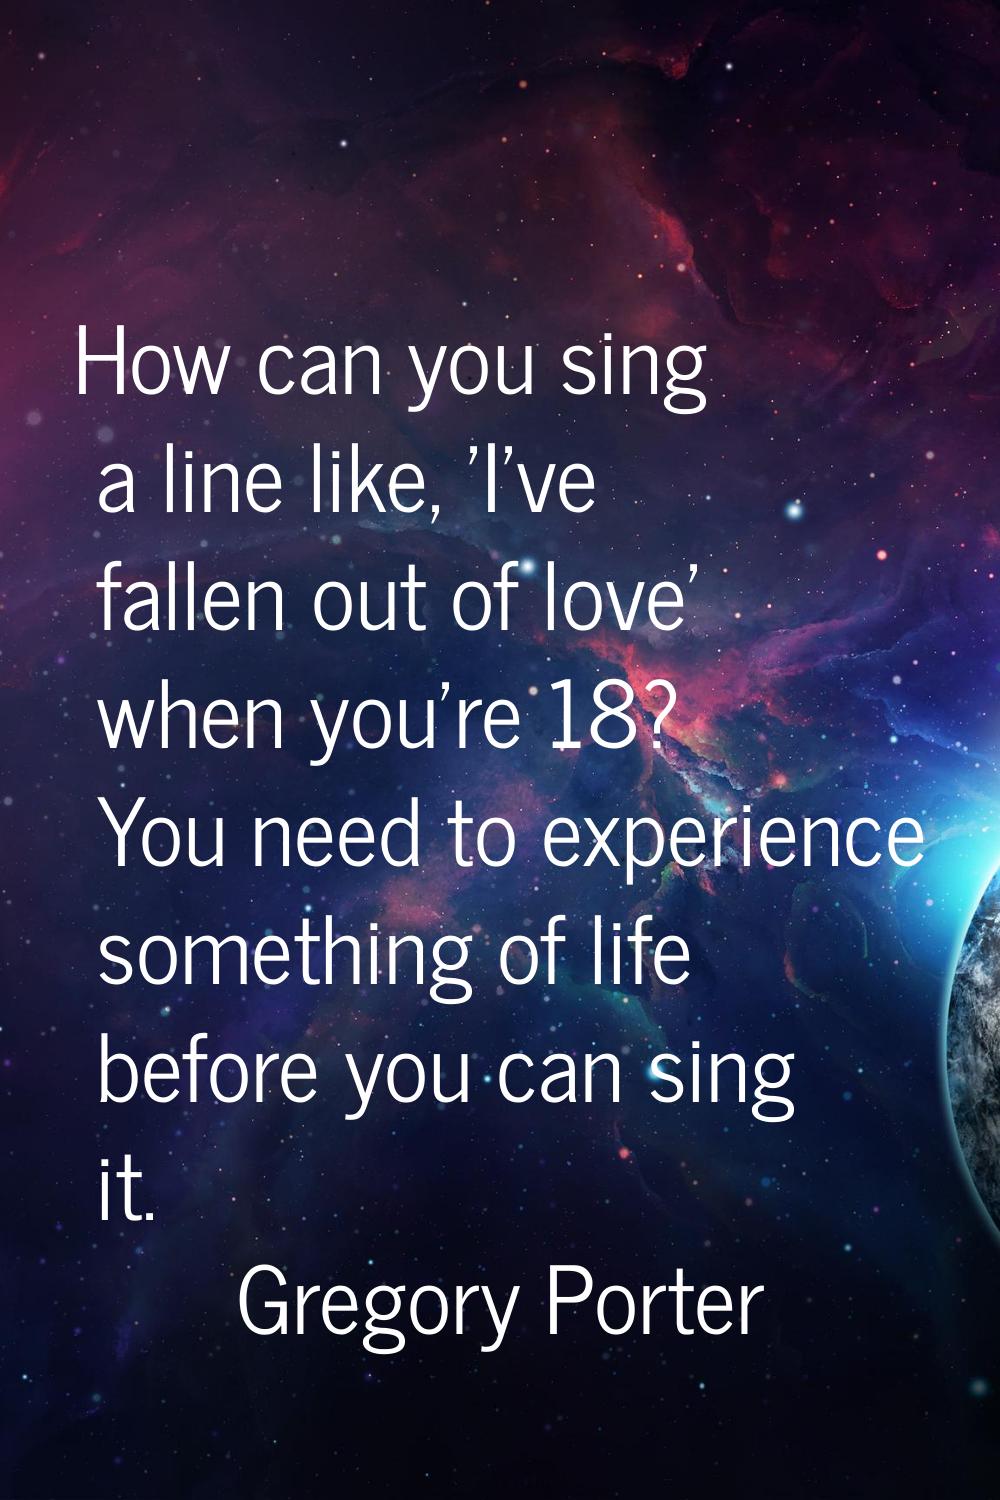 How can you sing a line like, 'I've fallen out of love' when you're 18? You need to experience some